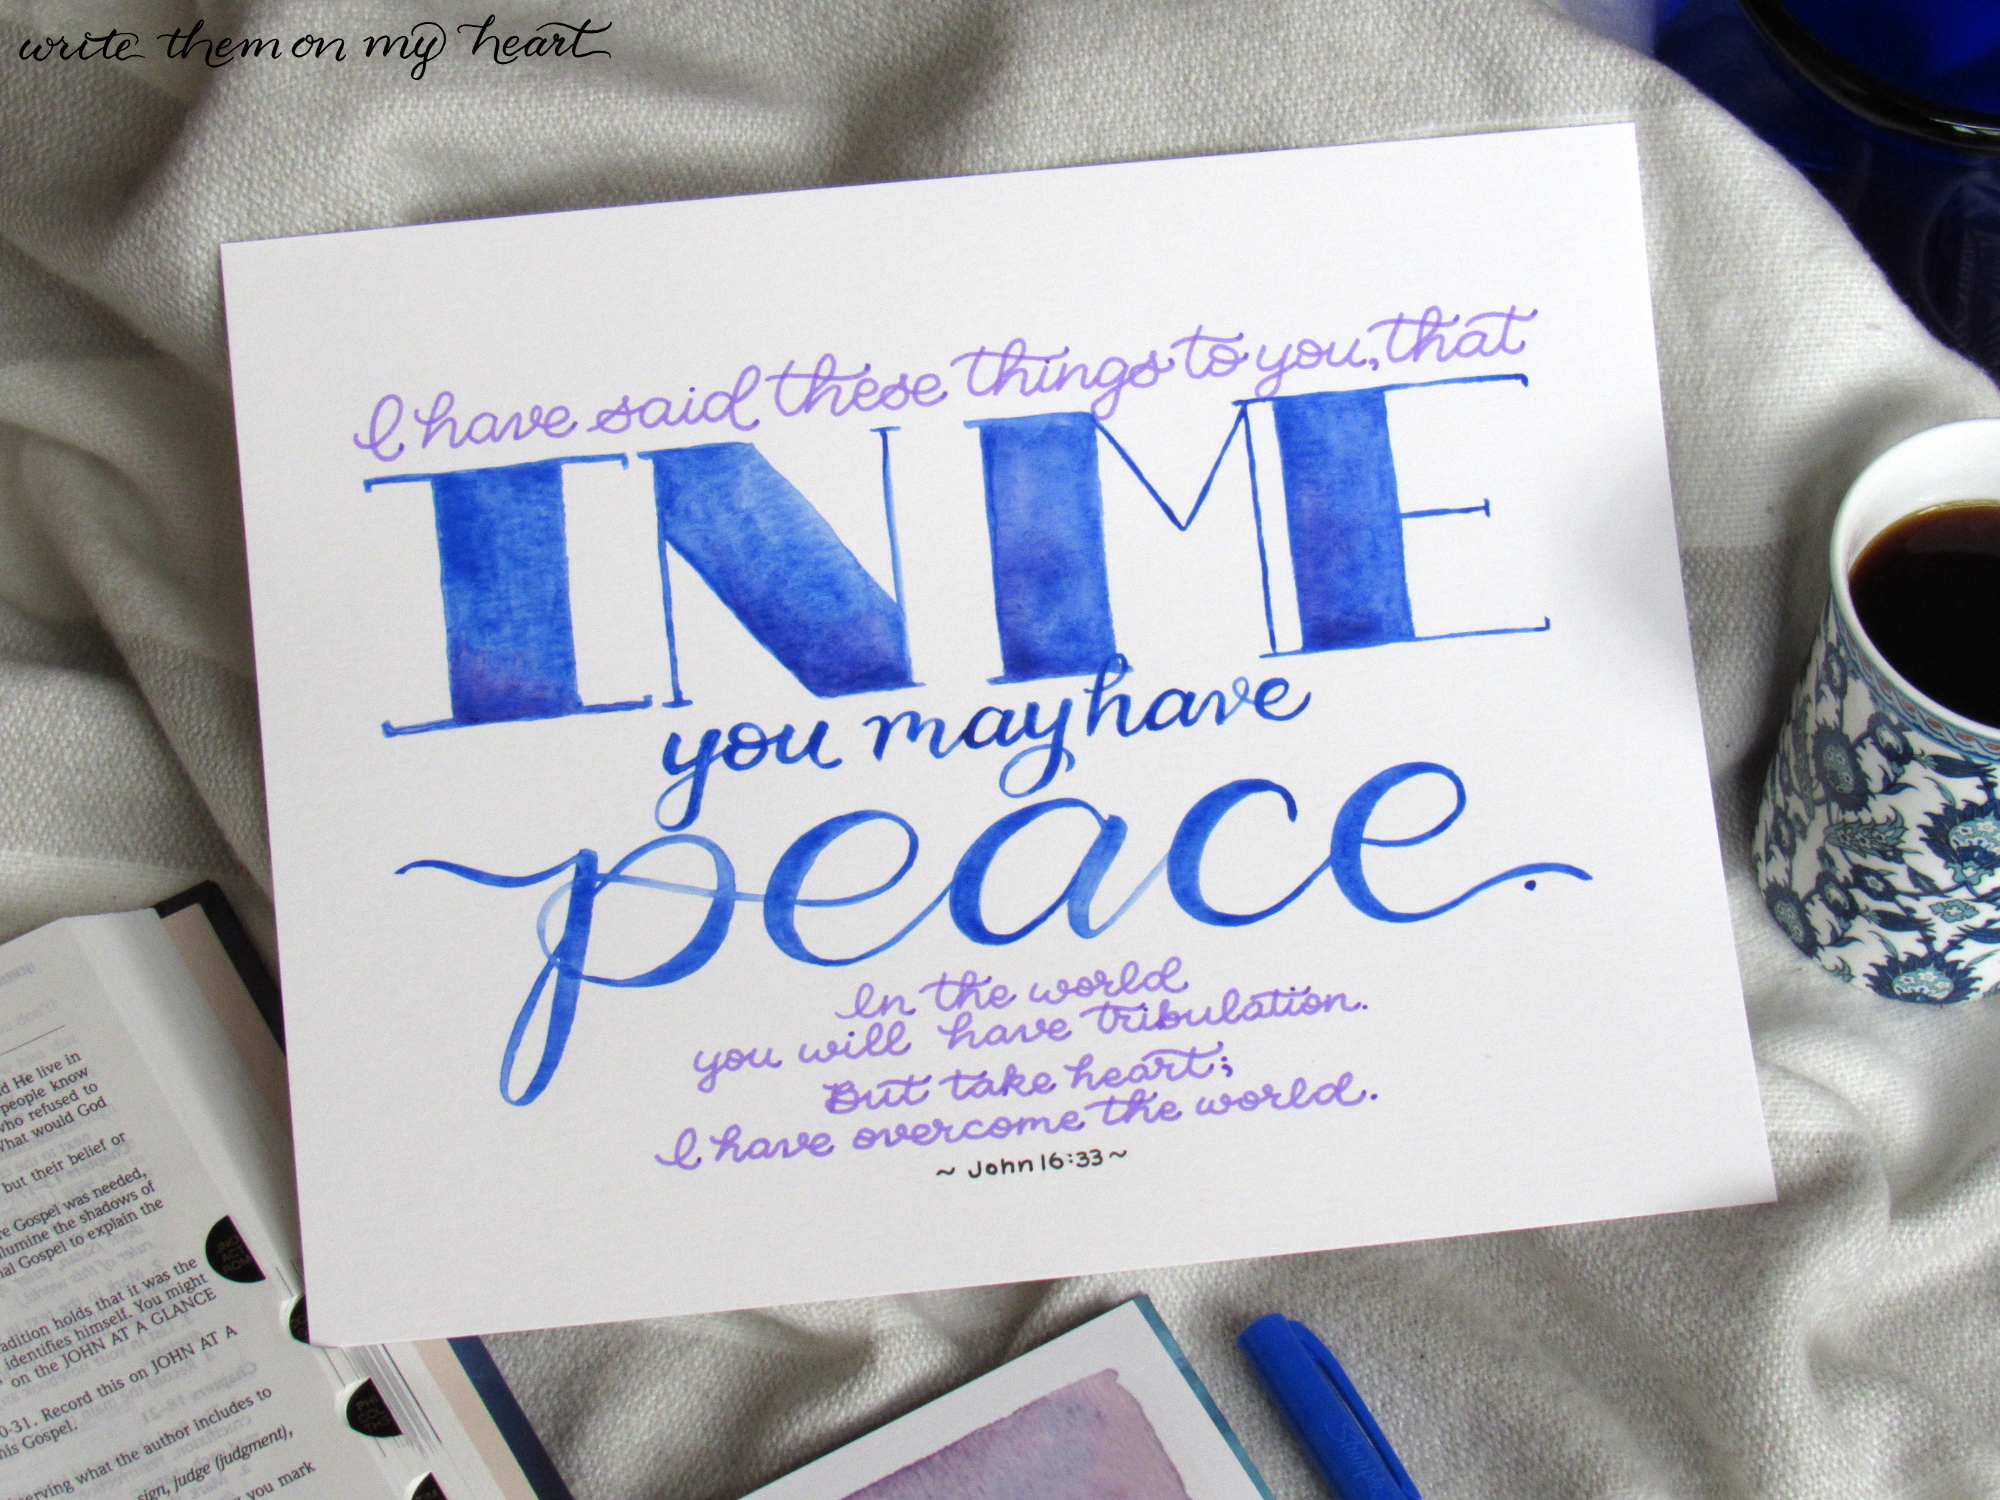 John 16:33 Scripture Art; In Me you may have peace.